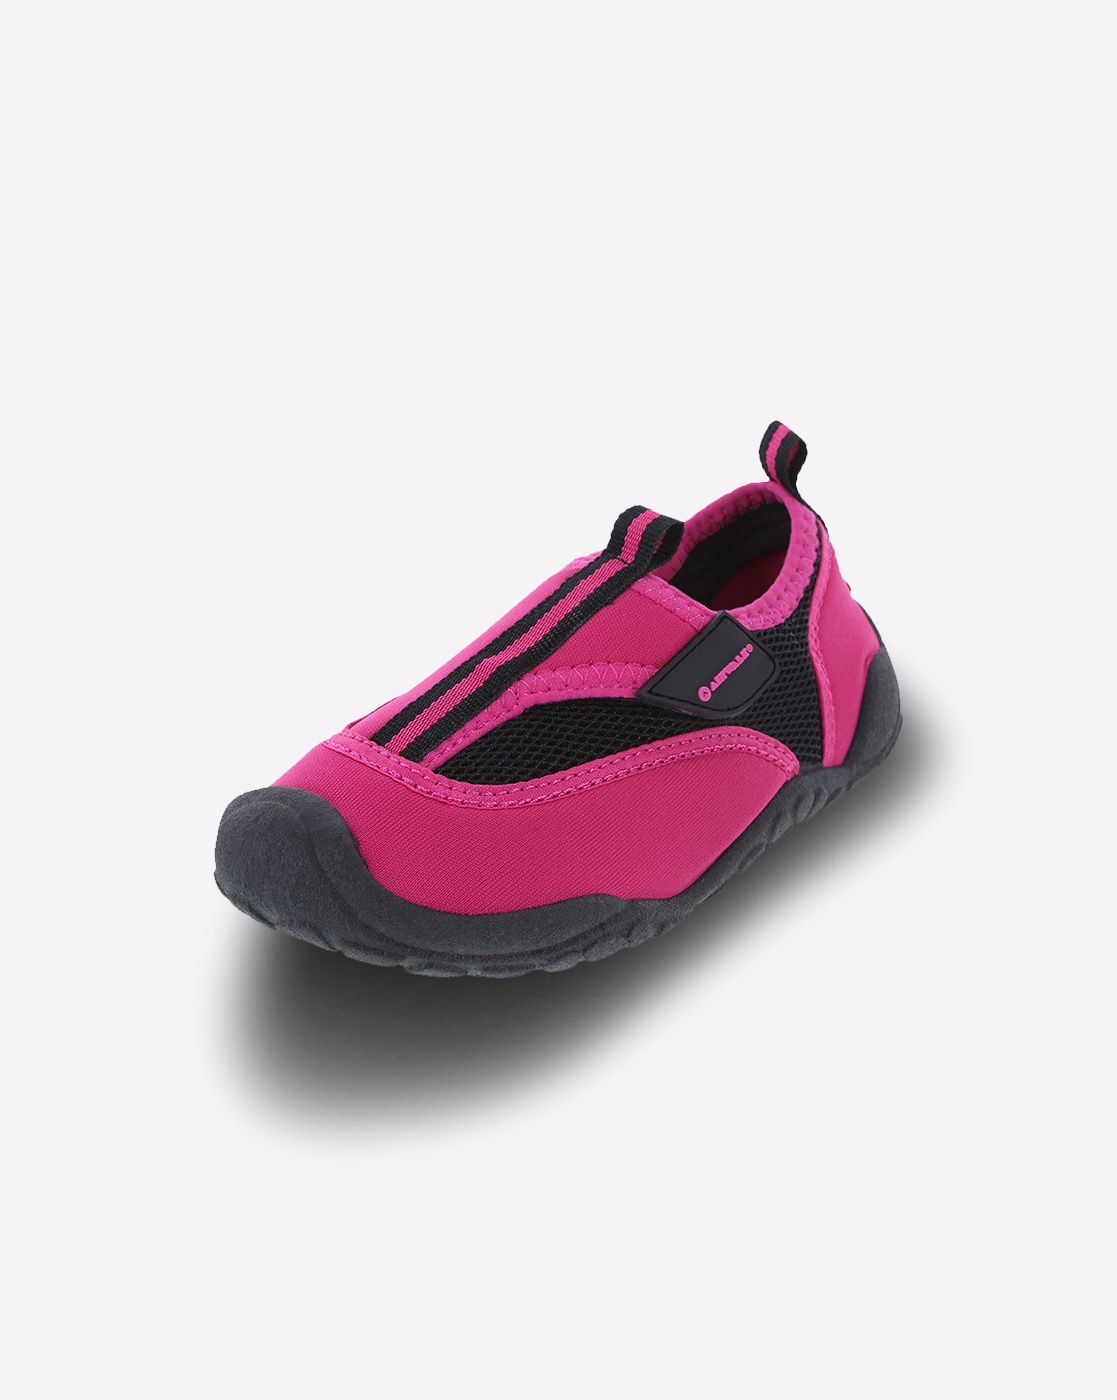 Buy Black \u0026 Pink Casual Shoes for Girls 